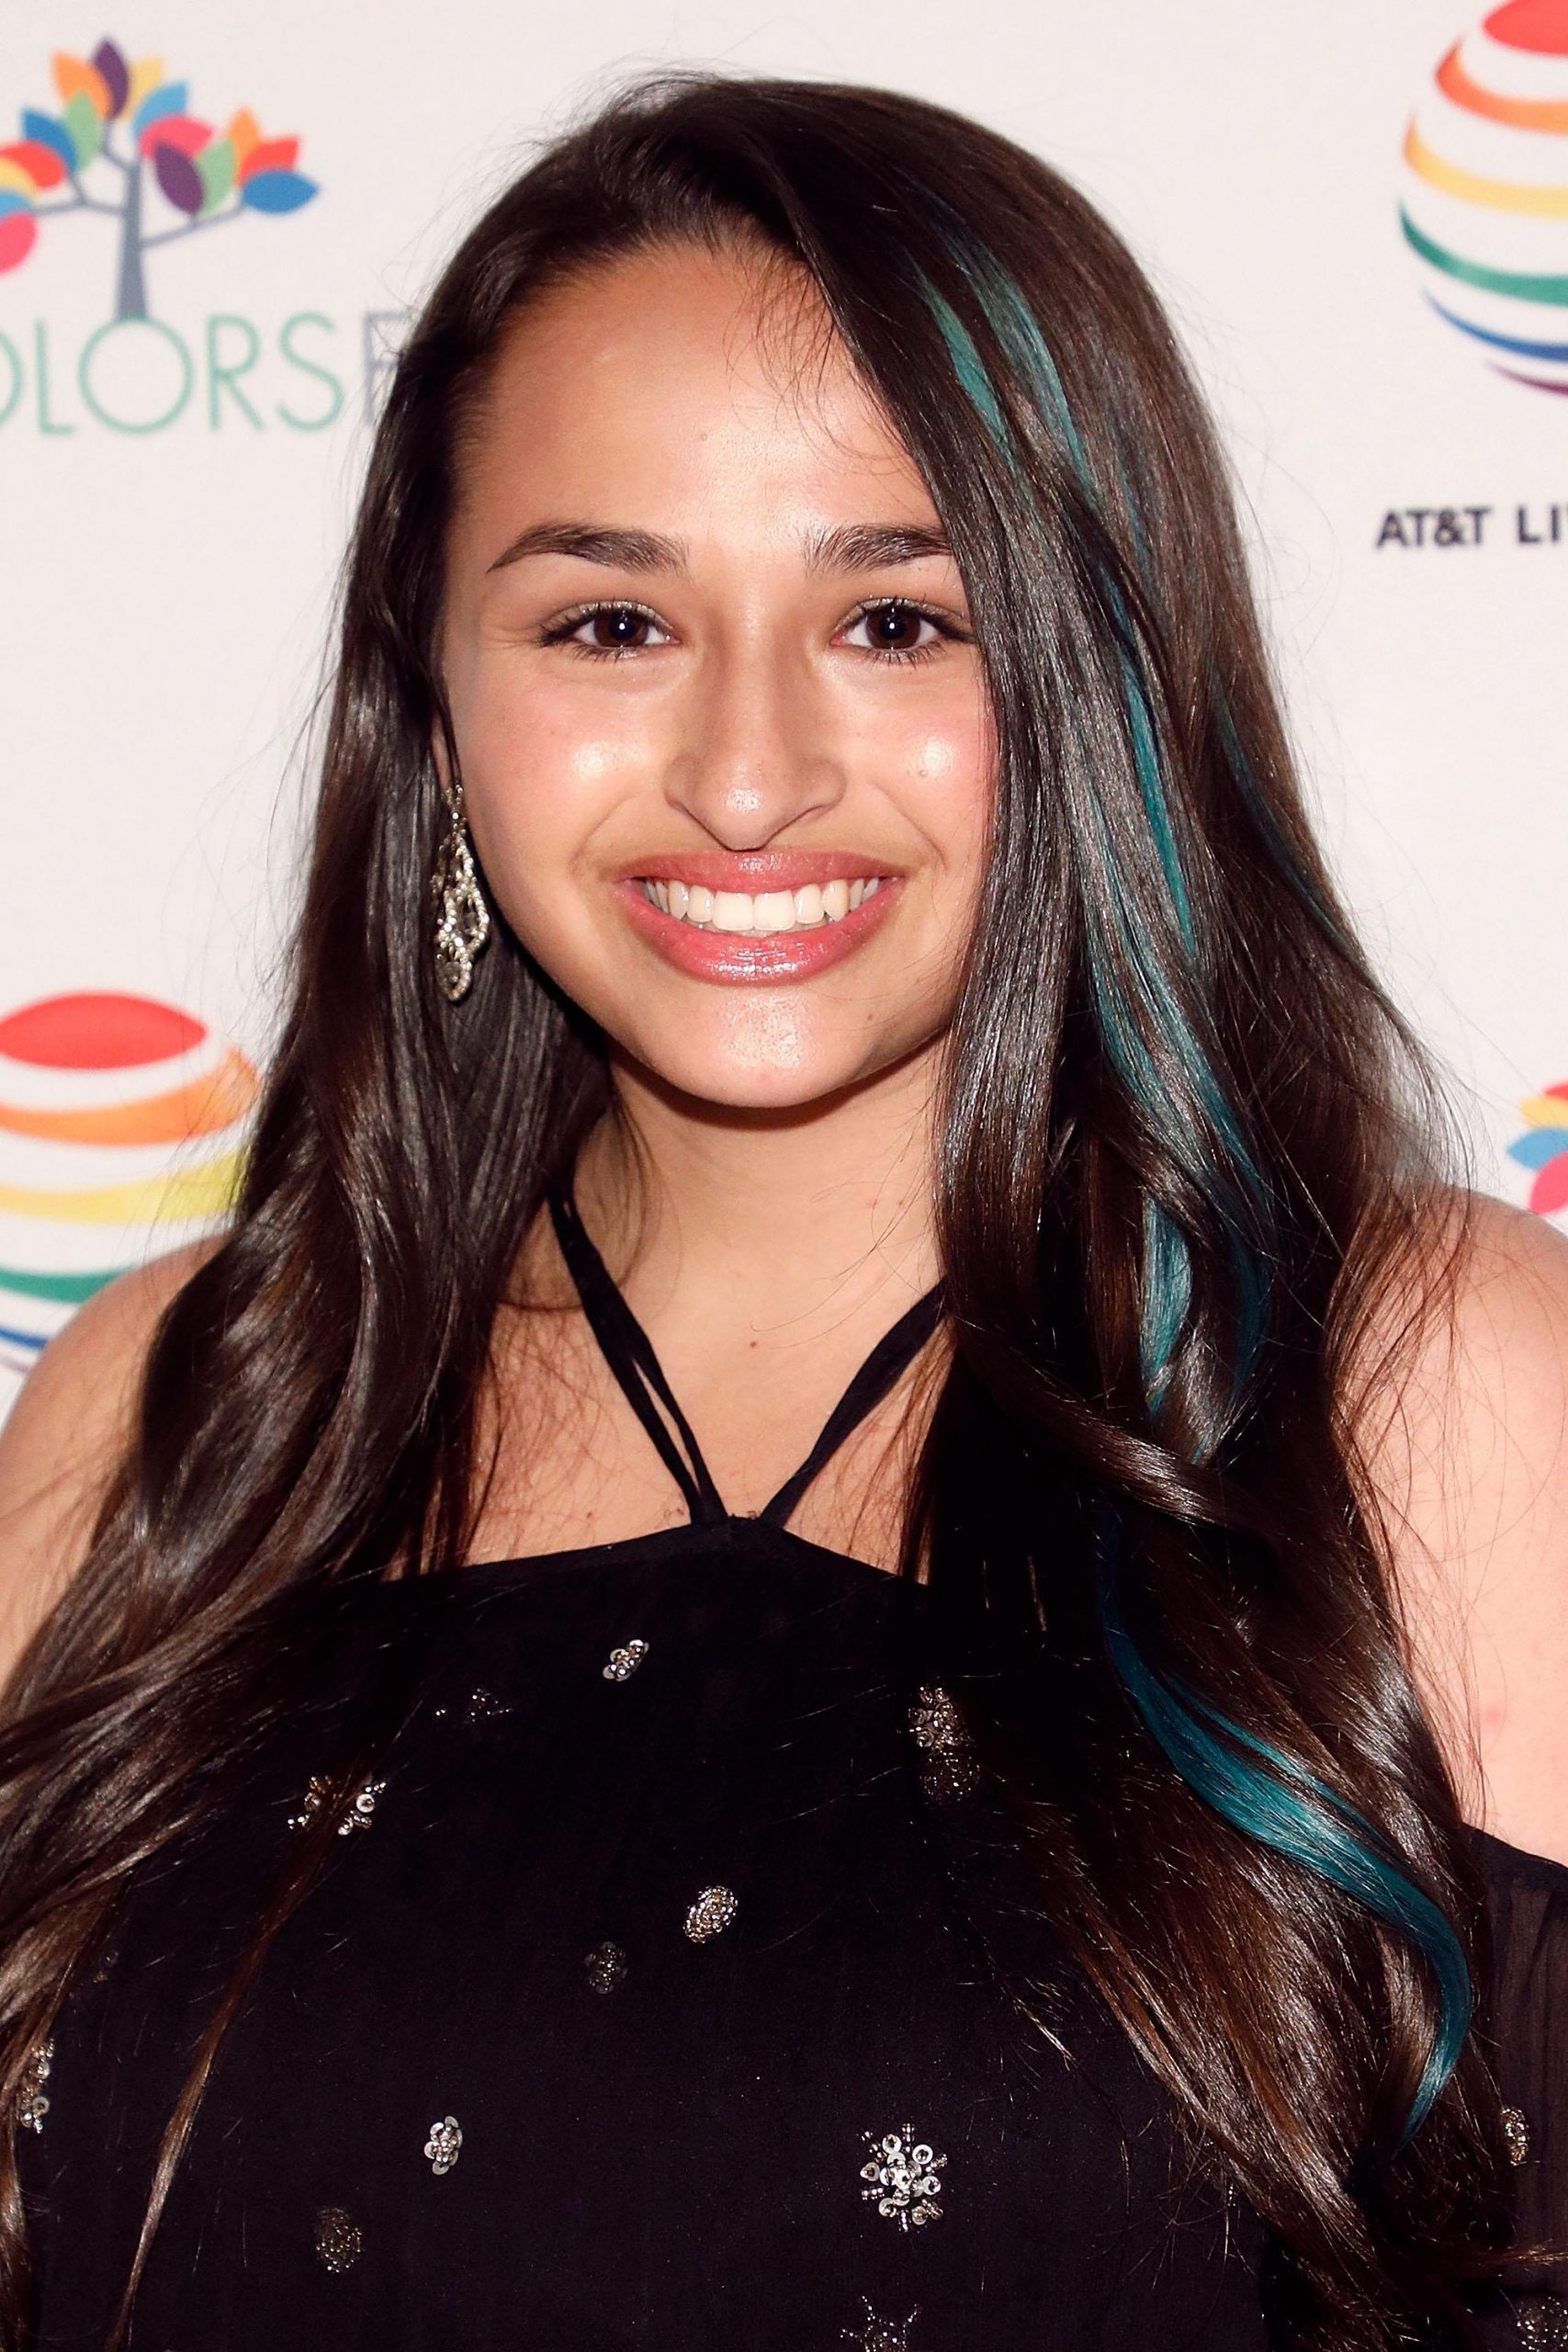 70+ Hot Pictures Of Jazz Jennings Which Will Make Your Mouth Water 10